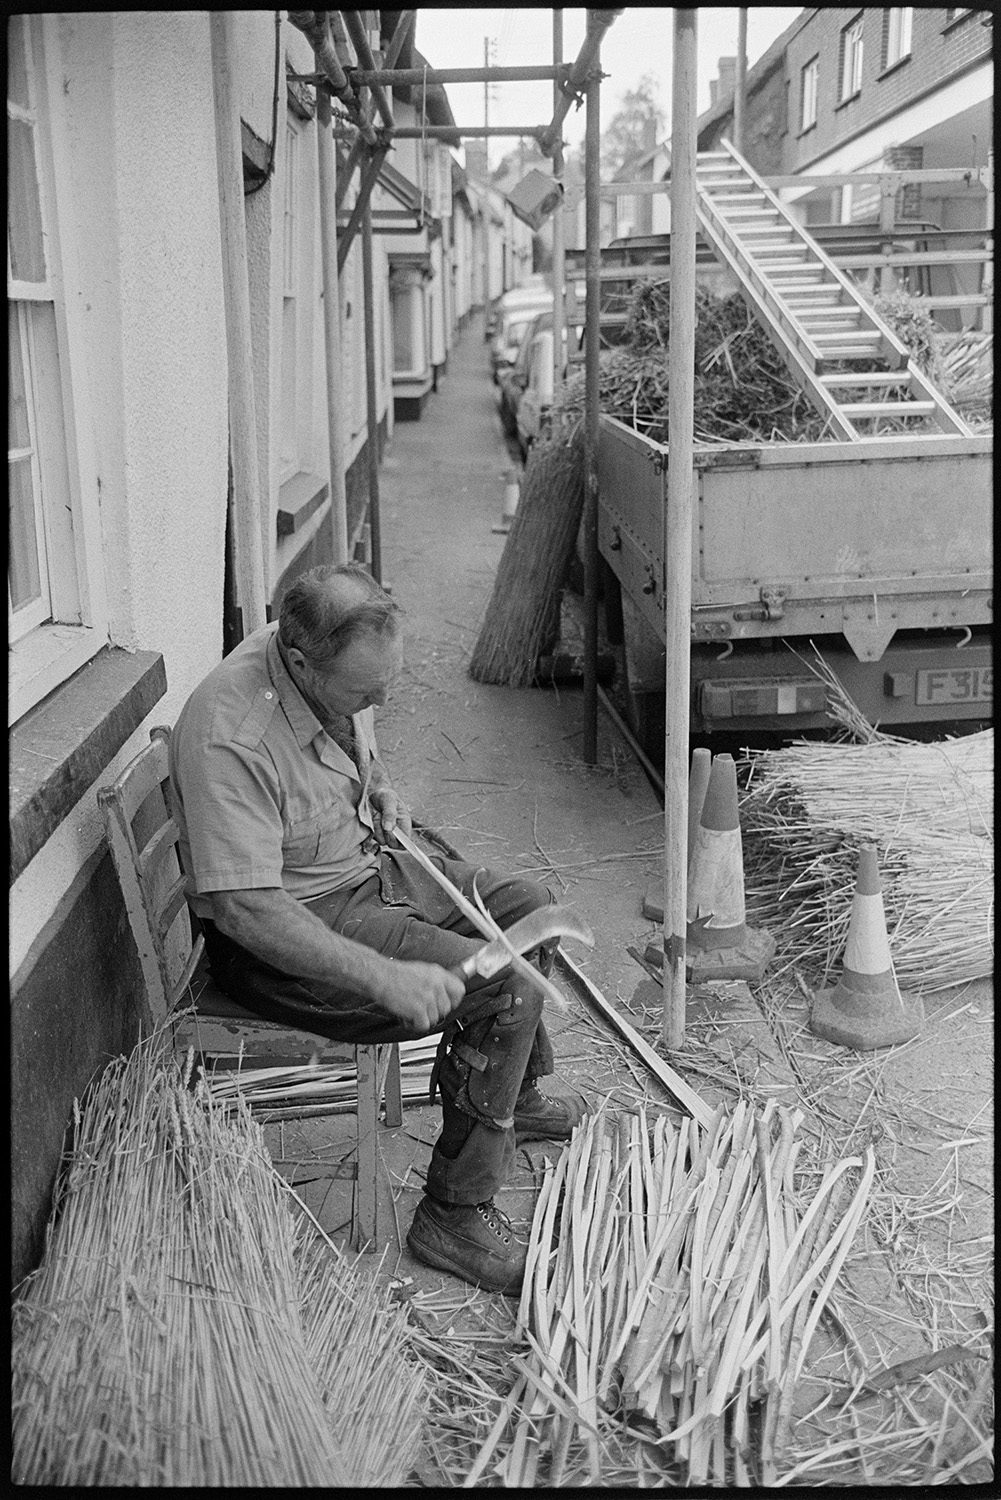 Thatcher cutting spars in village street. 
[A thatcher sat on a chair outside a house in South Molton Street, Chulmleigh, cutting spars for thatching using a billhook. Scaffolding, nitches of reed and a truck with a ladder are visible in the street.]